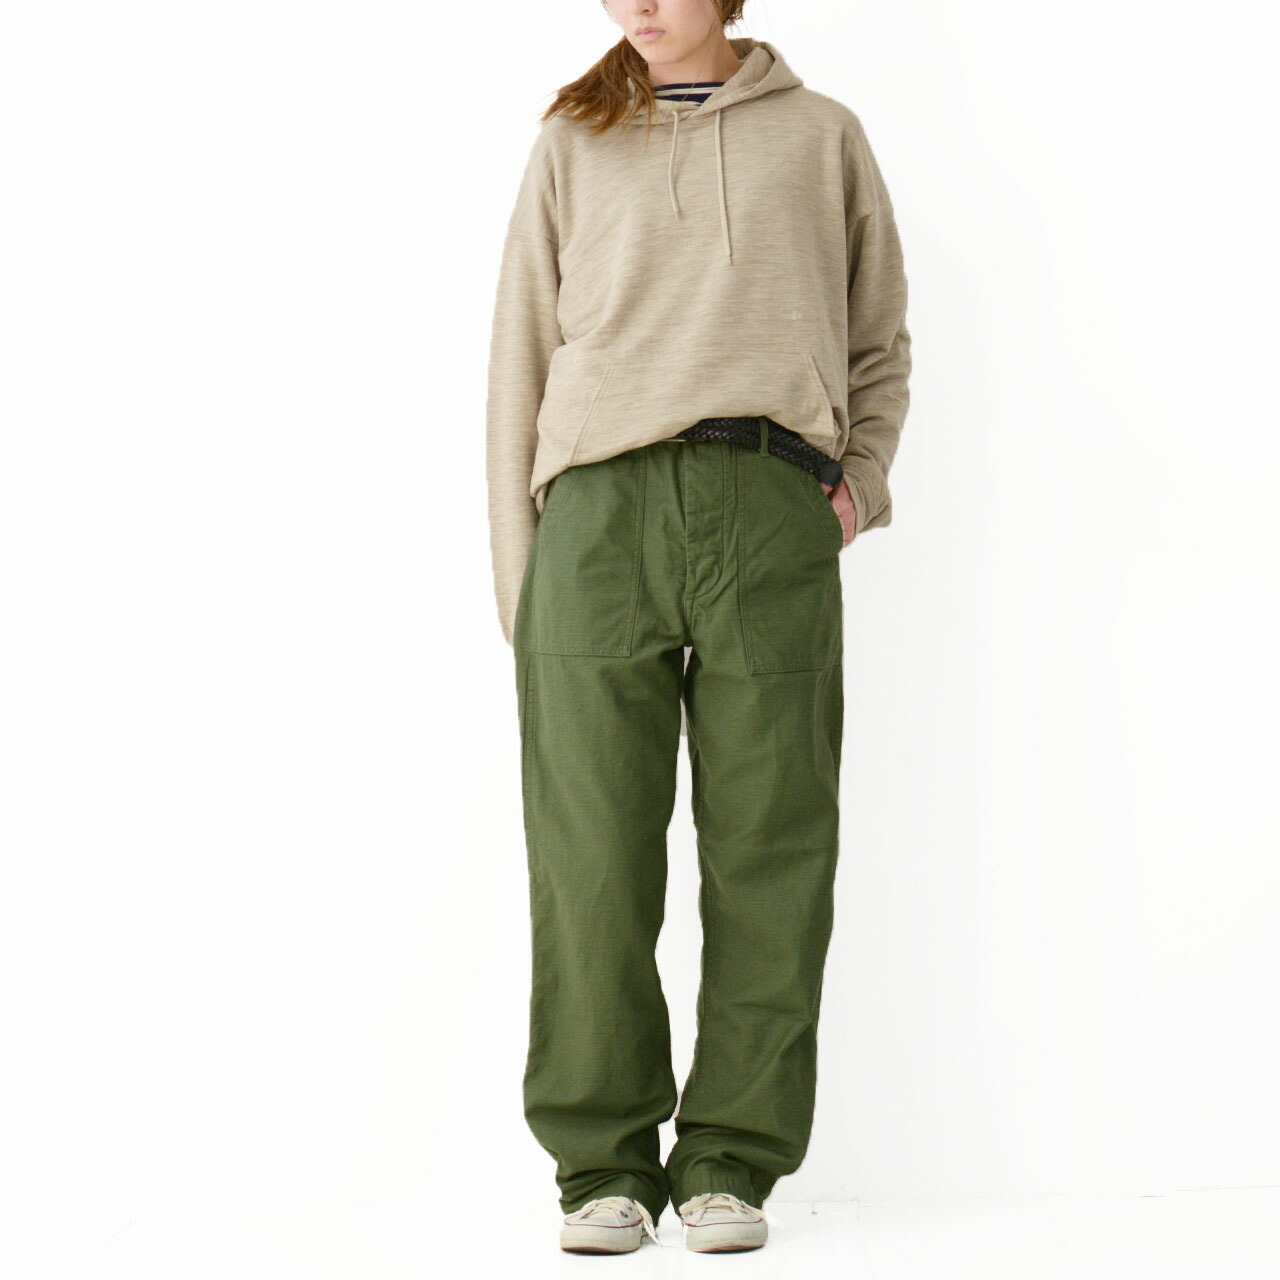 Gymphlex [ジムフレックス] WOOL STRETCH INLEY PULLOVER PARKER [GY-C0022 WIS]_f0051306_14010554.jpg